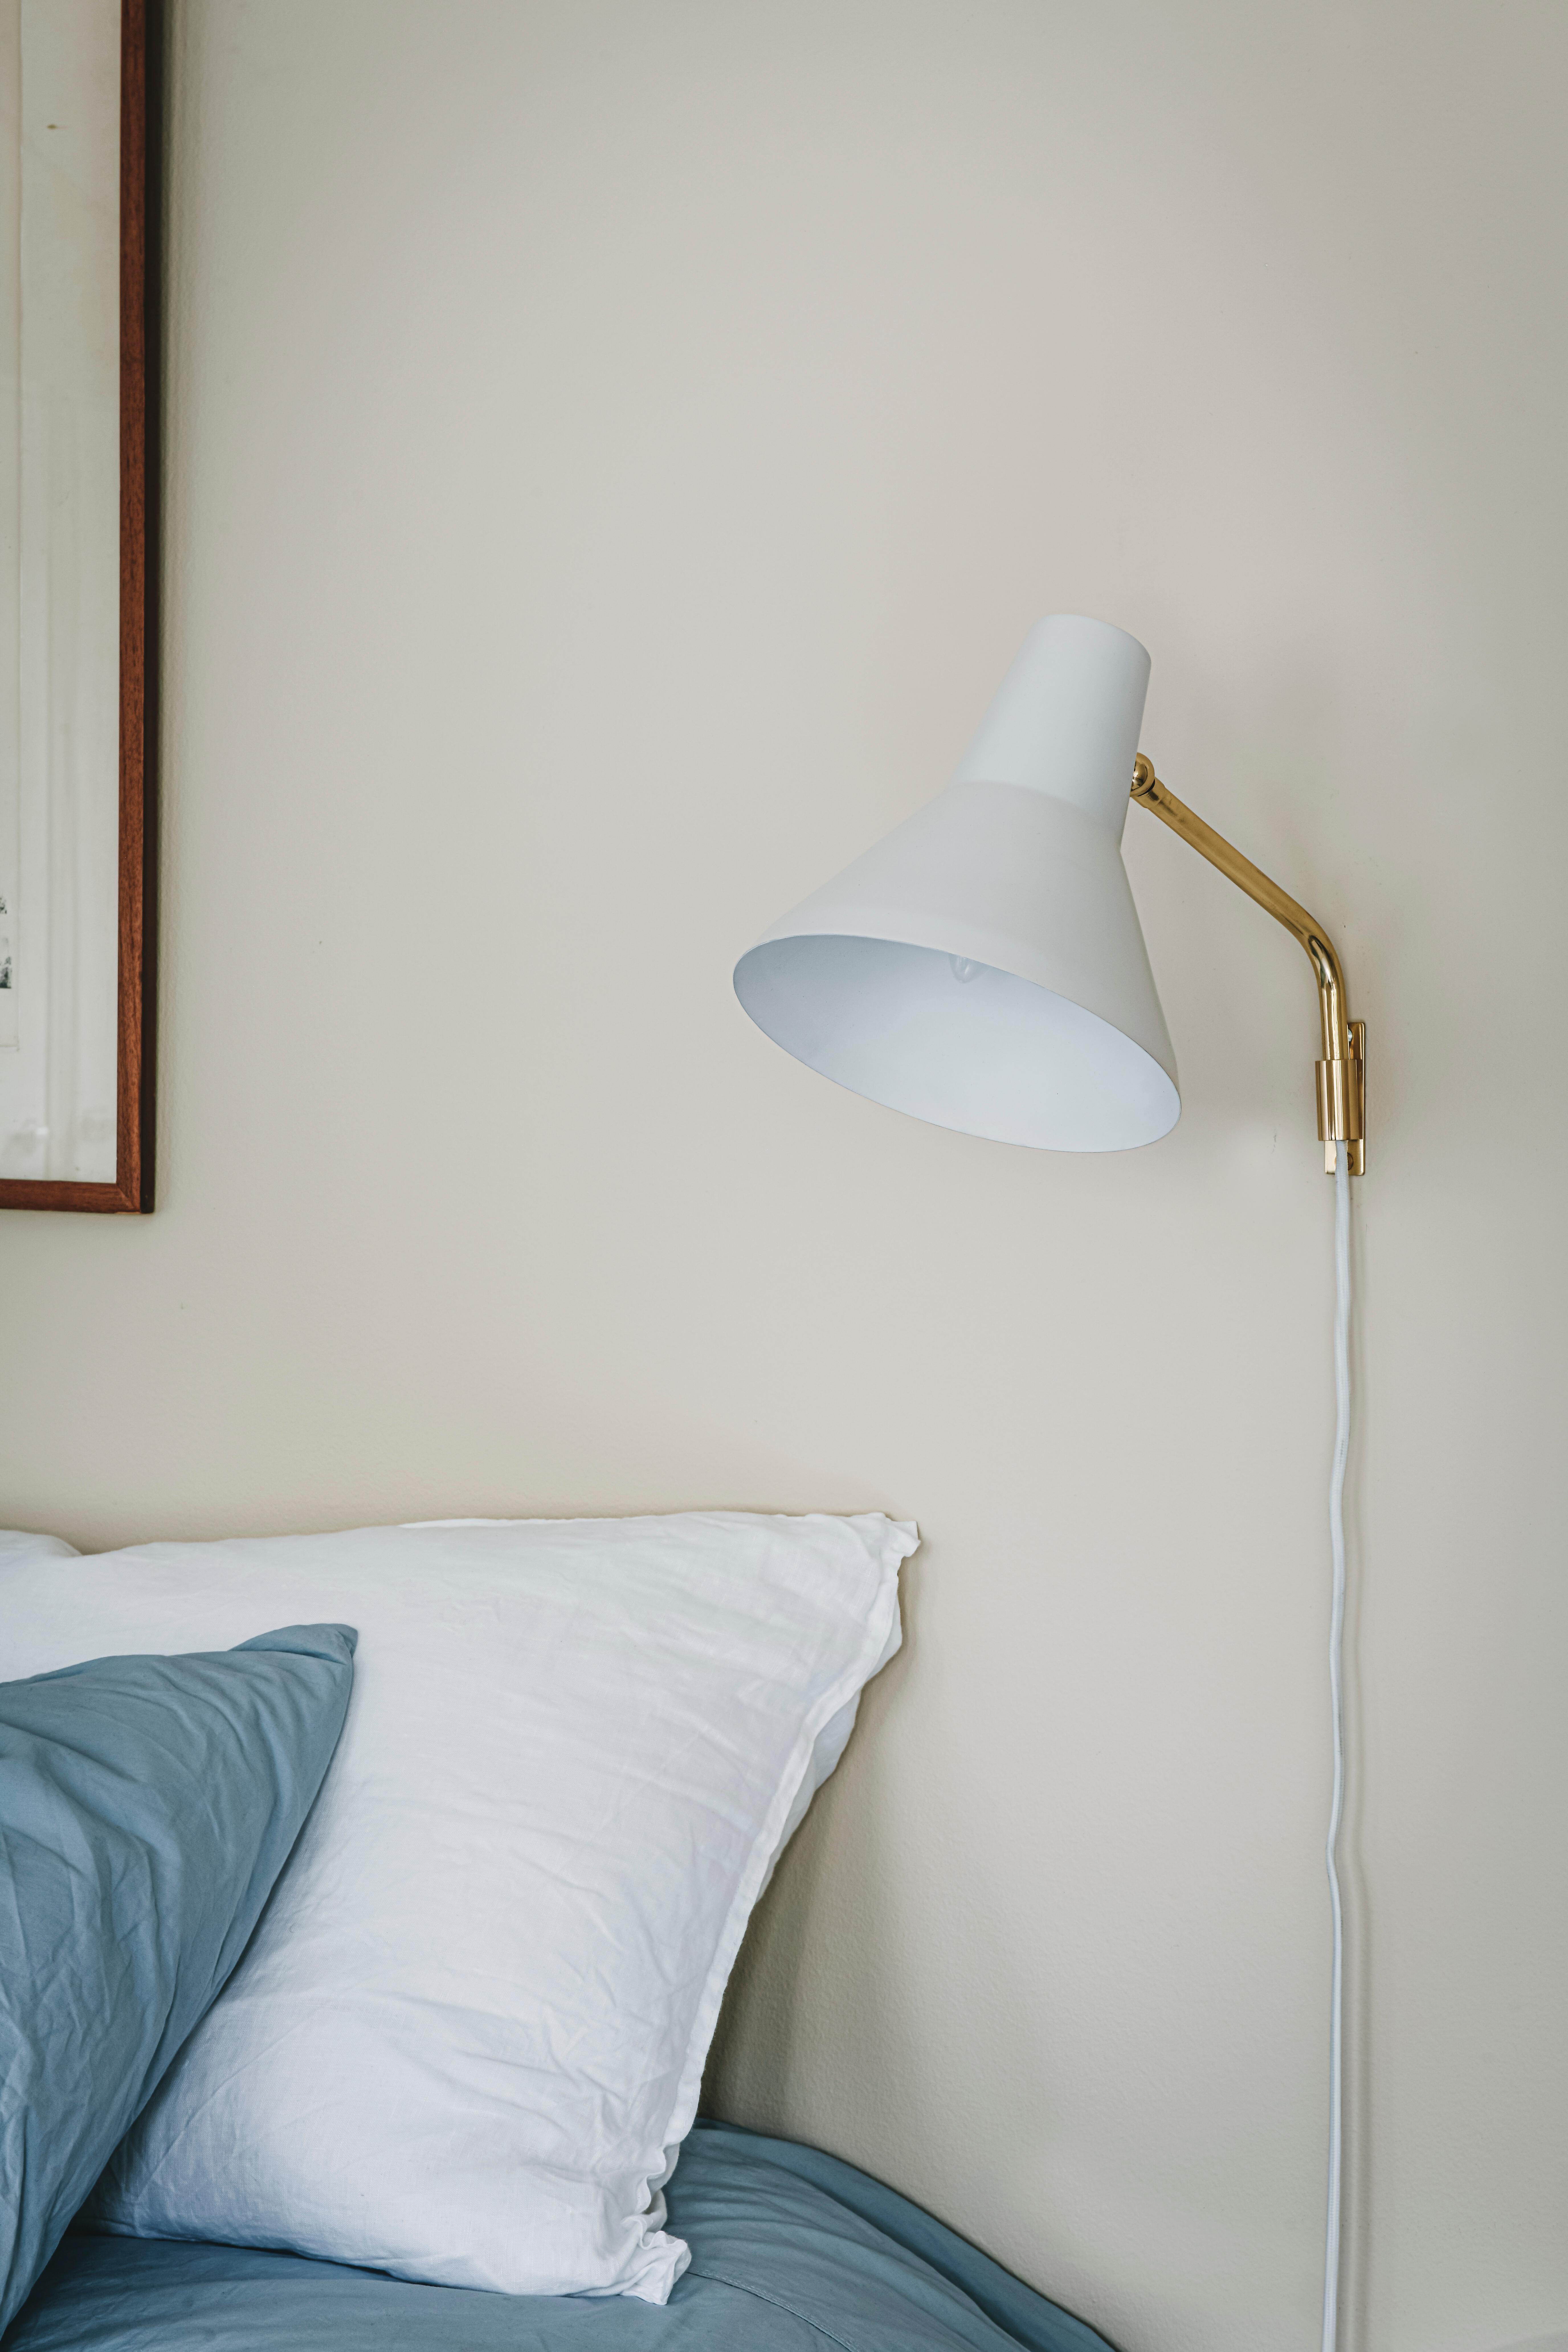 Lisa Johansson-Pape 'Carin' wall lamp in brass for Innolux. 

Innolux Carin is a new family of luminaires with a sophisticated look sealed by a brass or chrome arm. The beautiful metal dome is easy to direct and the practical touch switch brings a